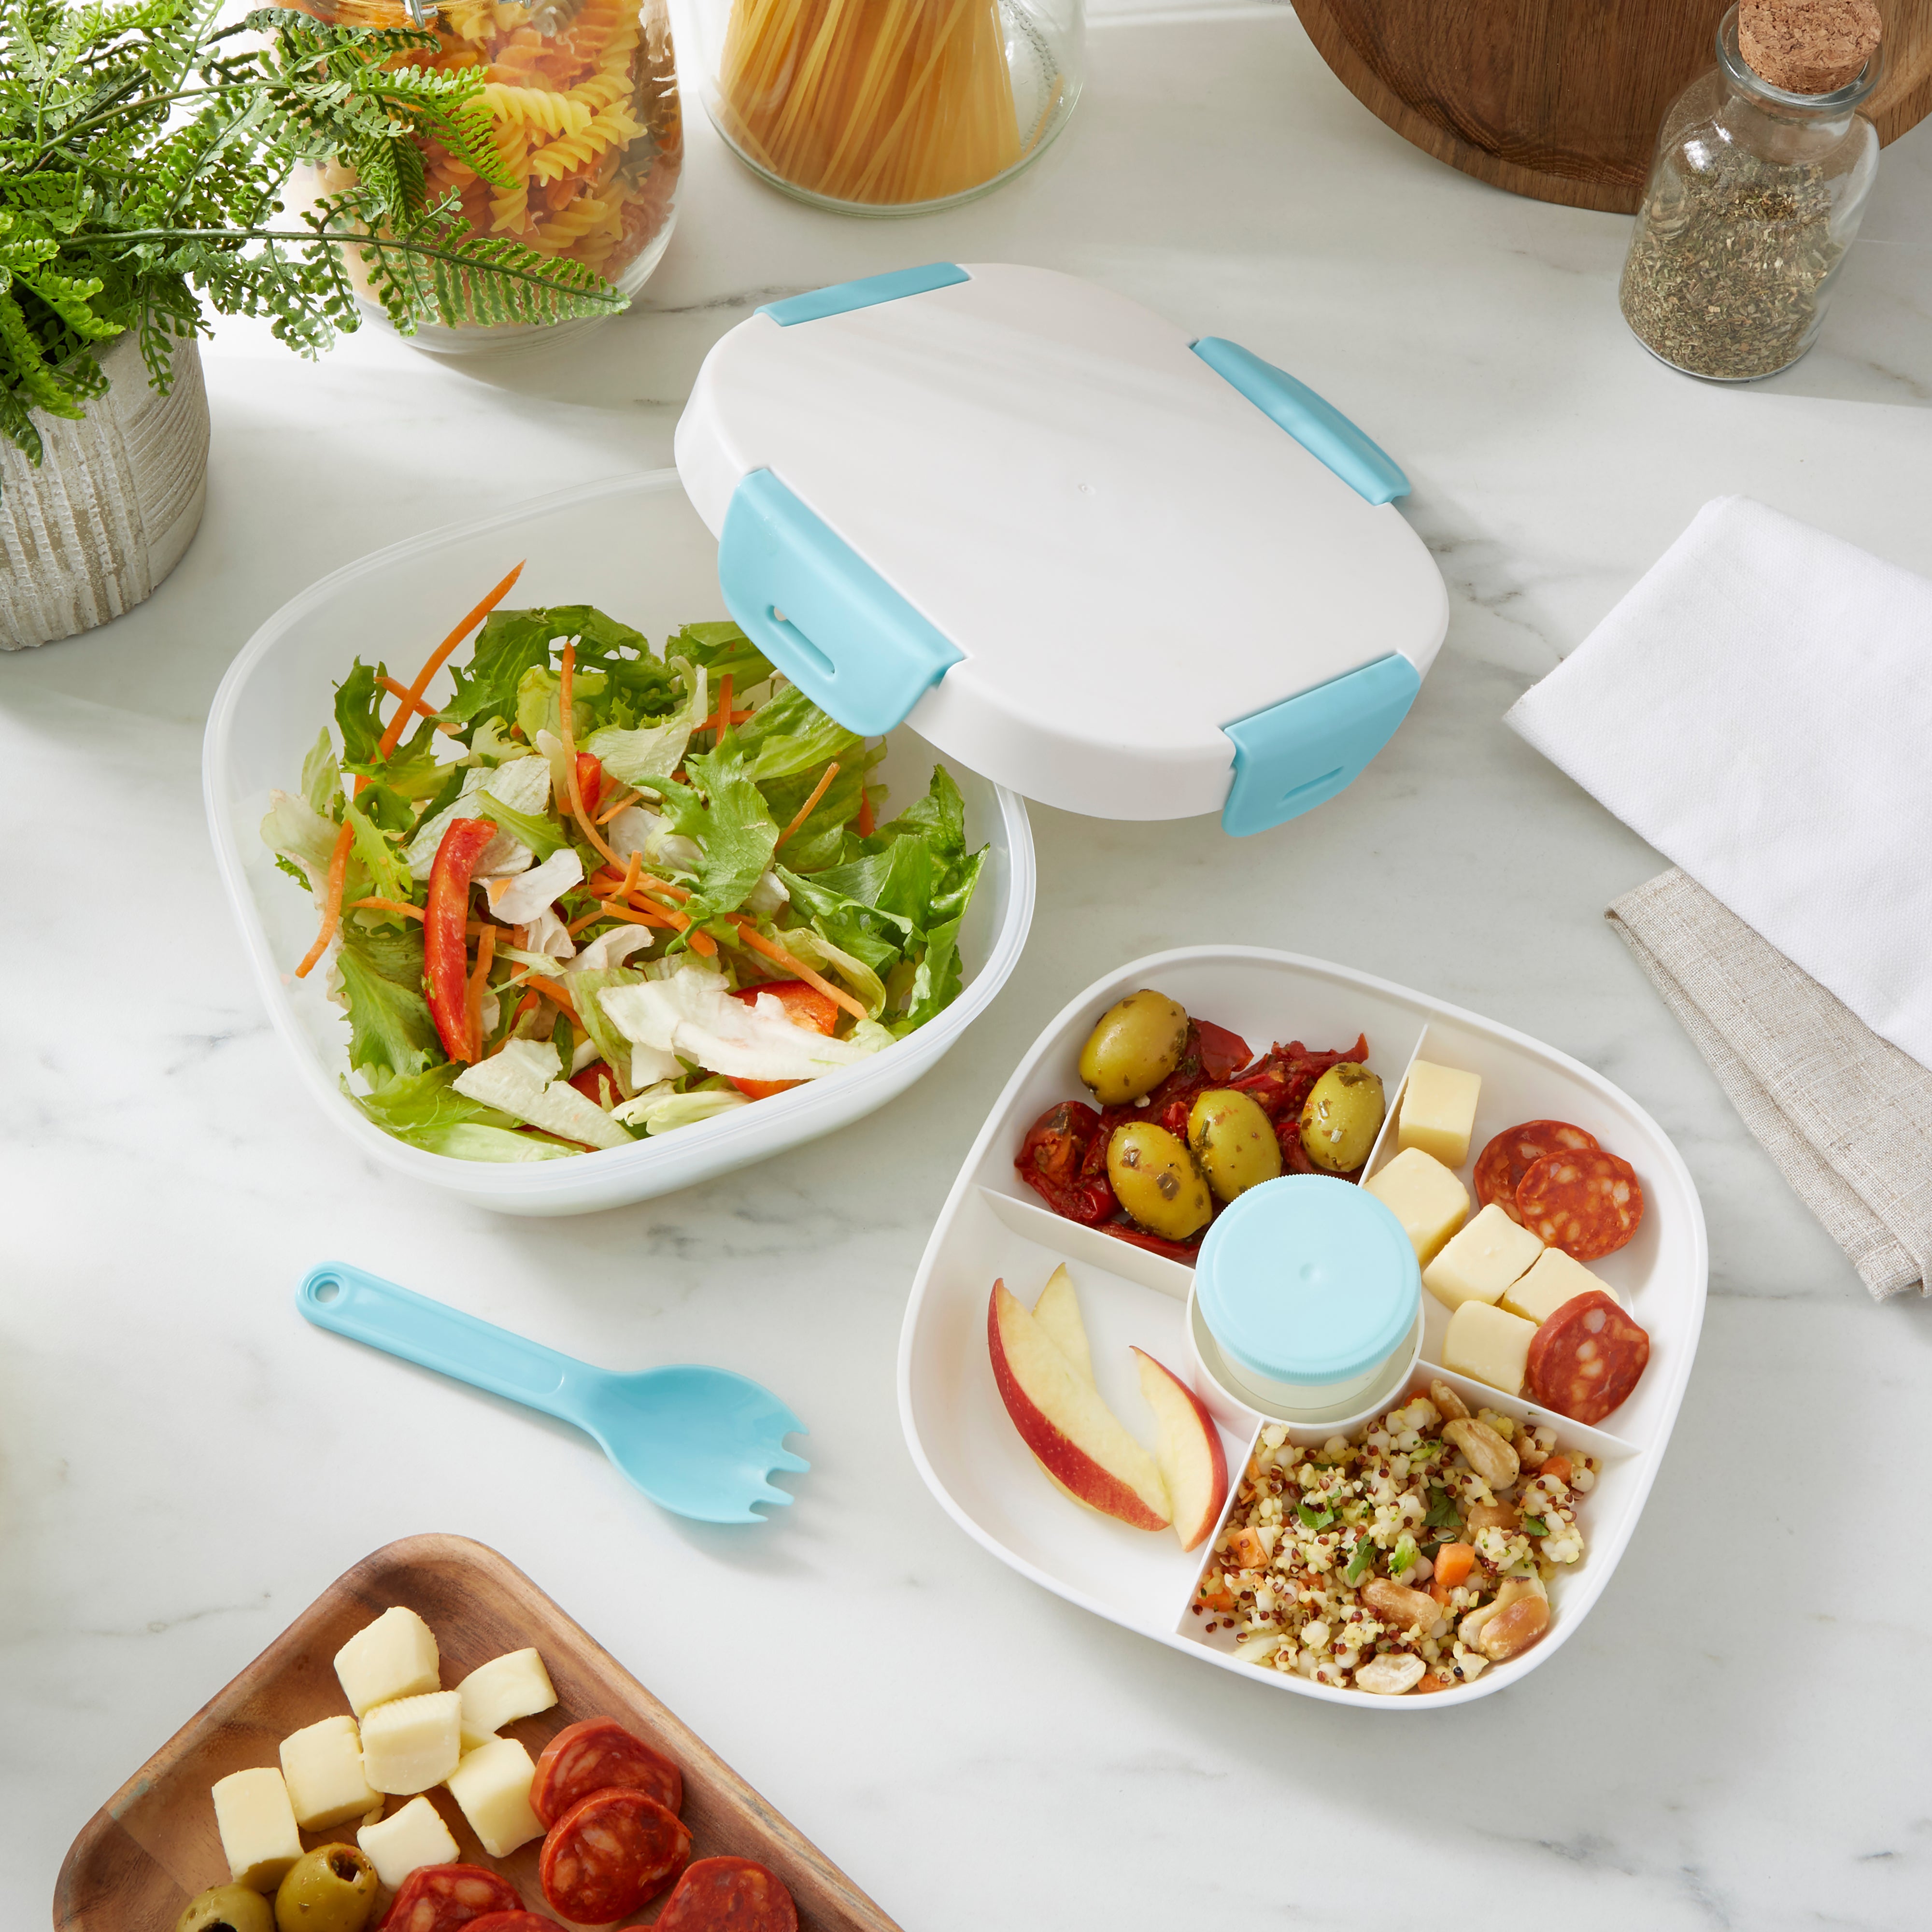 Lunch Box with Dressing Compartment